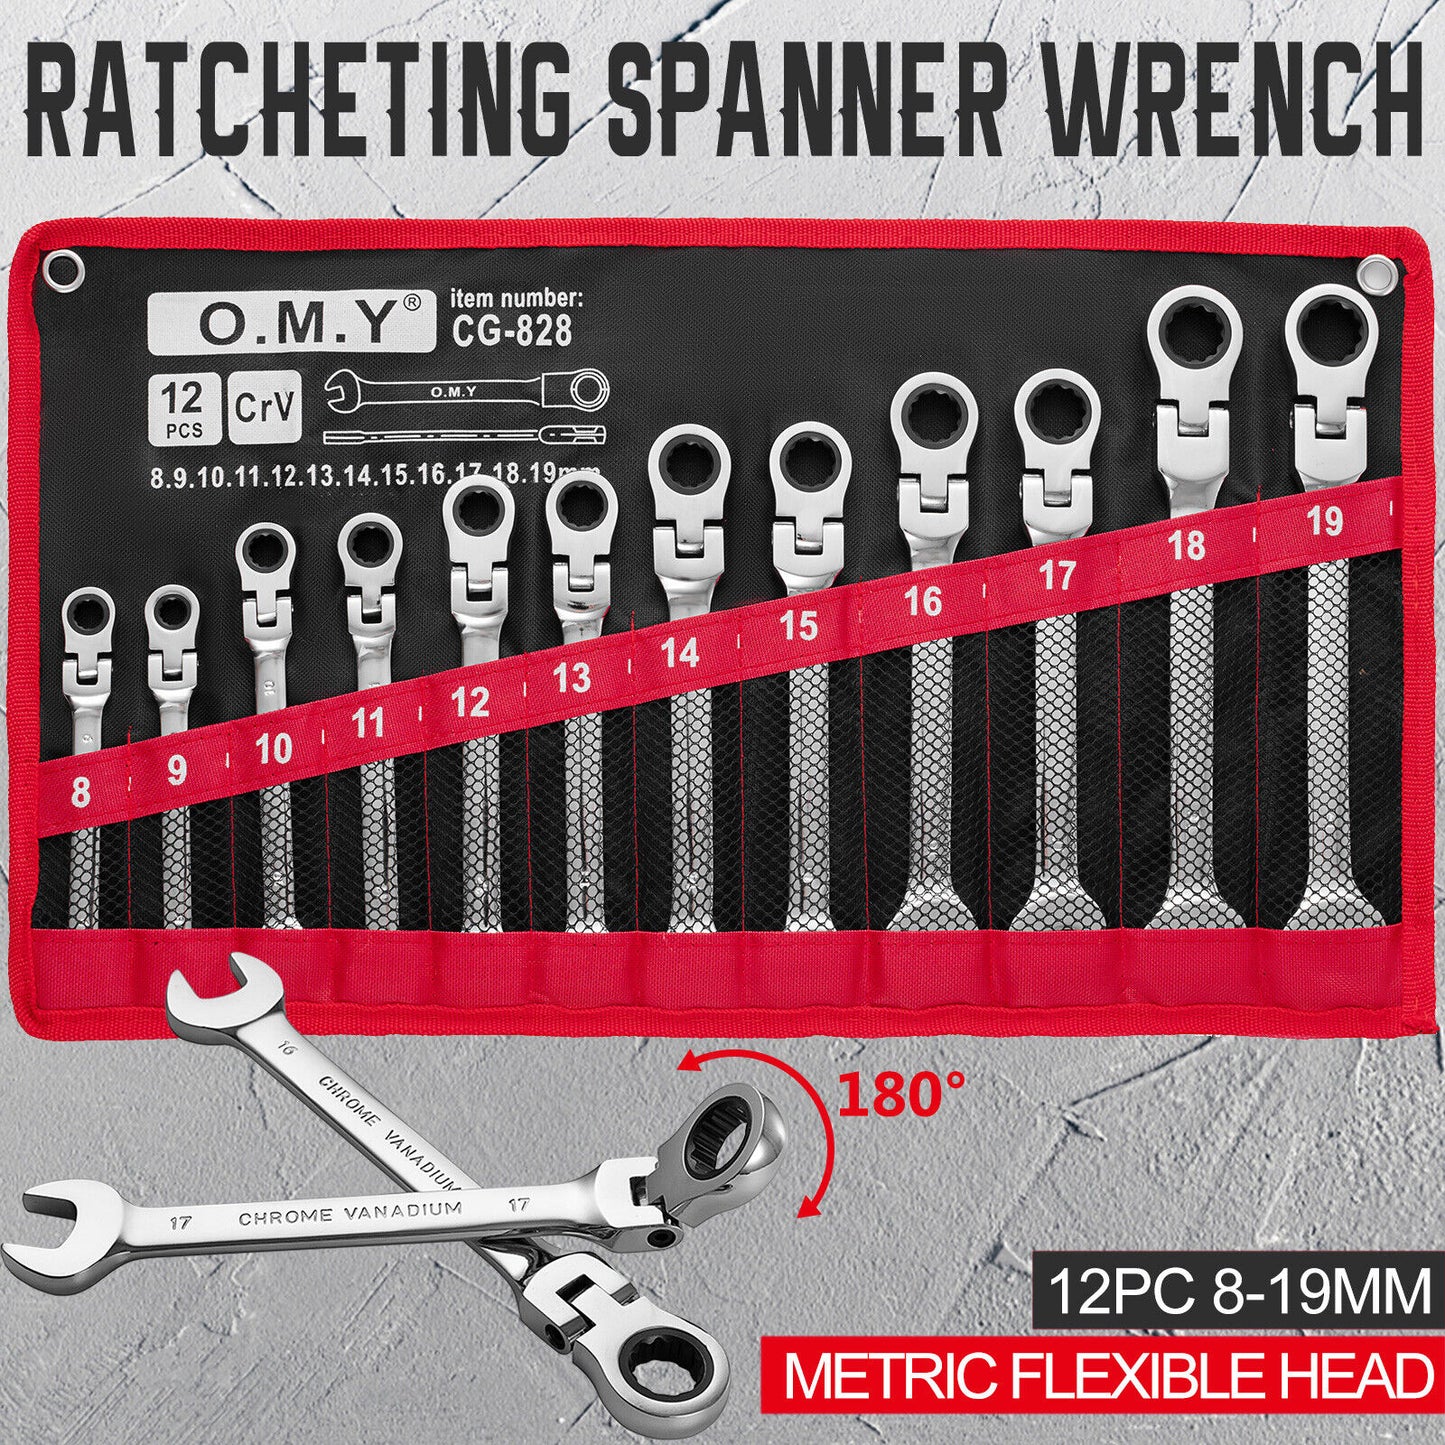 12Pc 8-19mm Metric Flexible Head Ratcheting Wrench Combination Spanner Tool Set